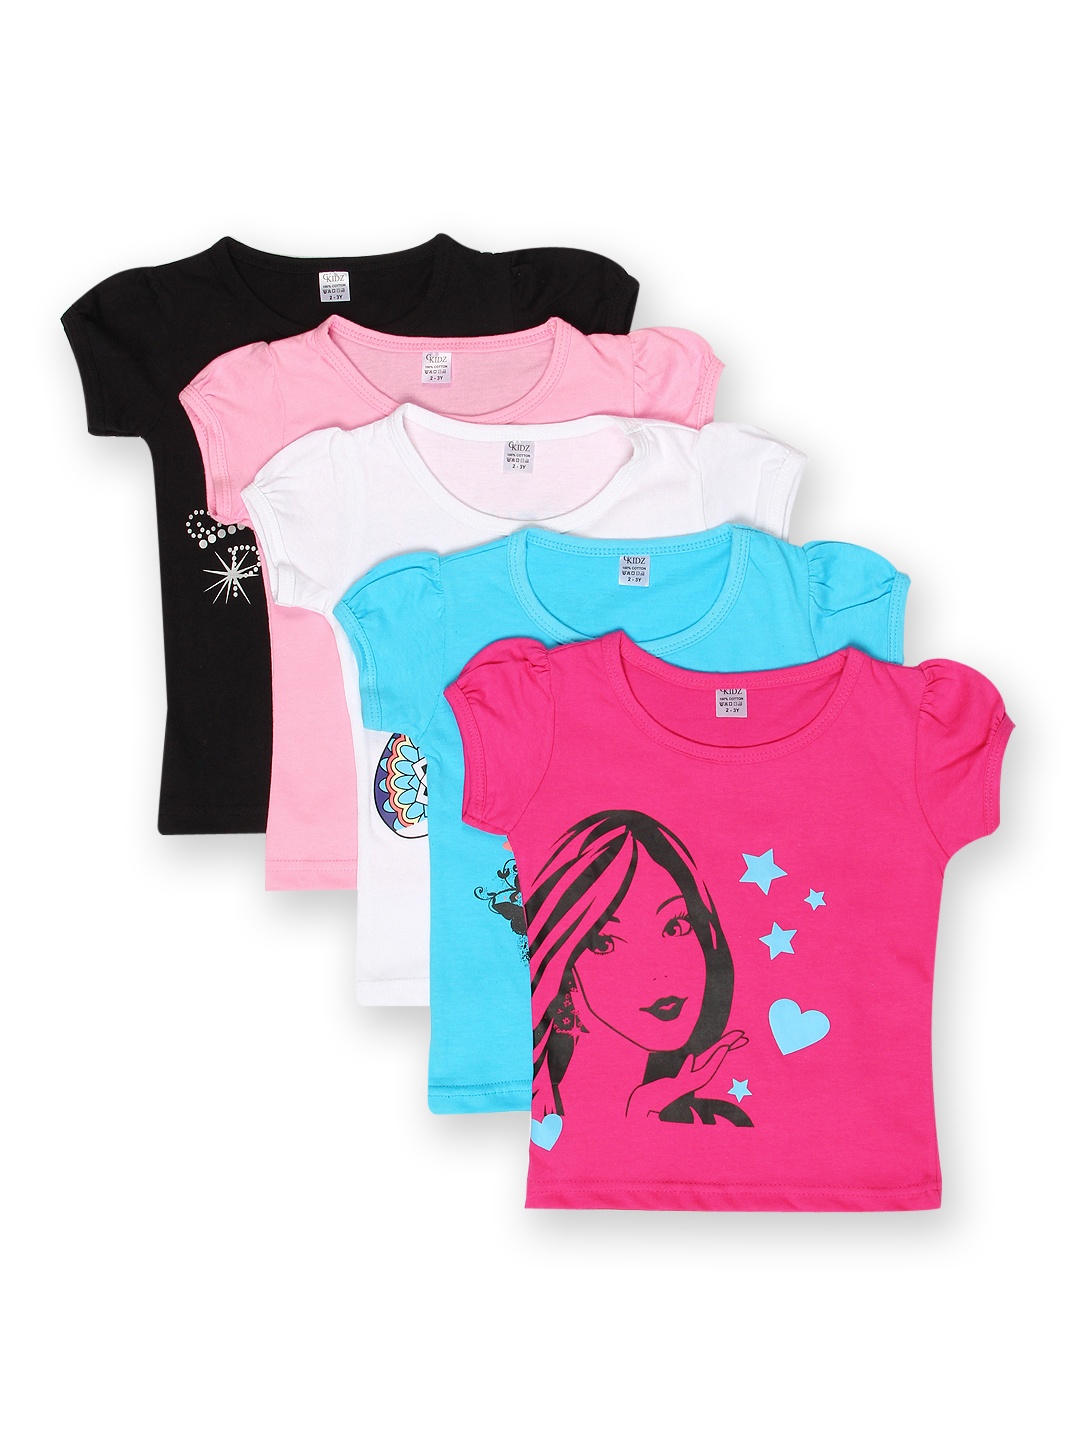 

GKIDZ Girls Pack of 5 Printed Pure Cotton T-shirts, Multi